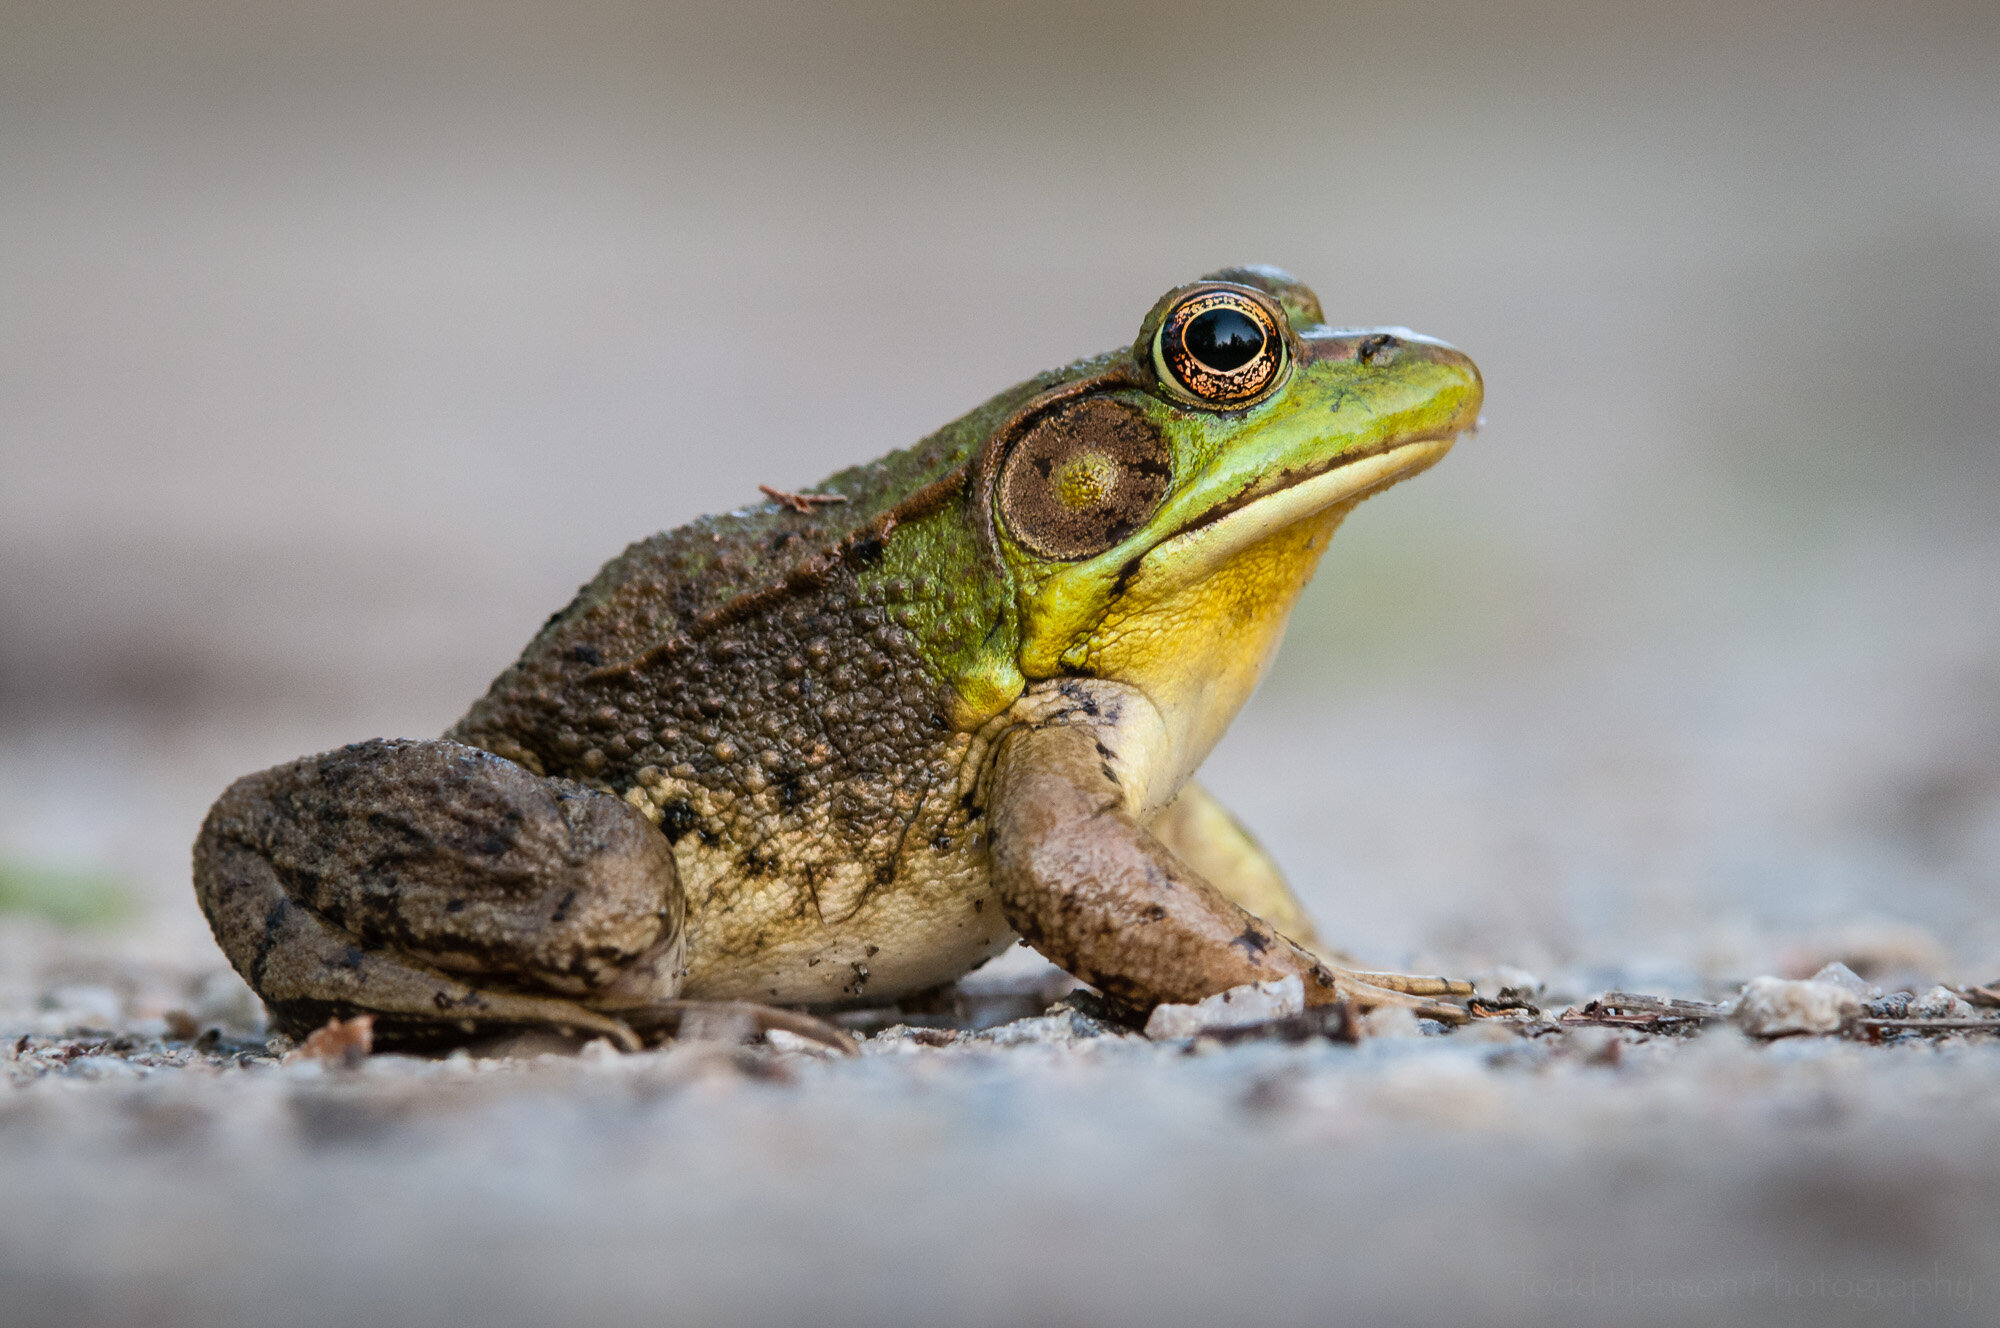  Portrait of a Green Frog: After 